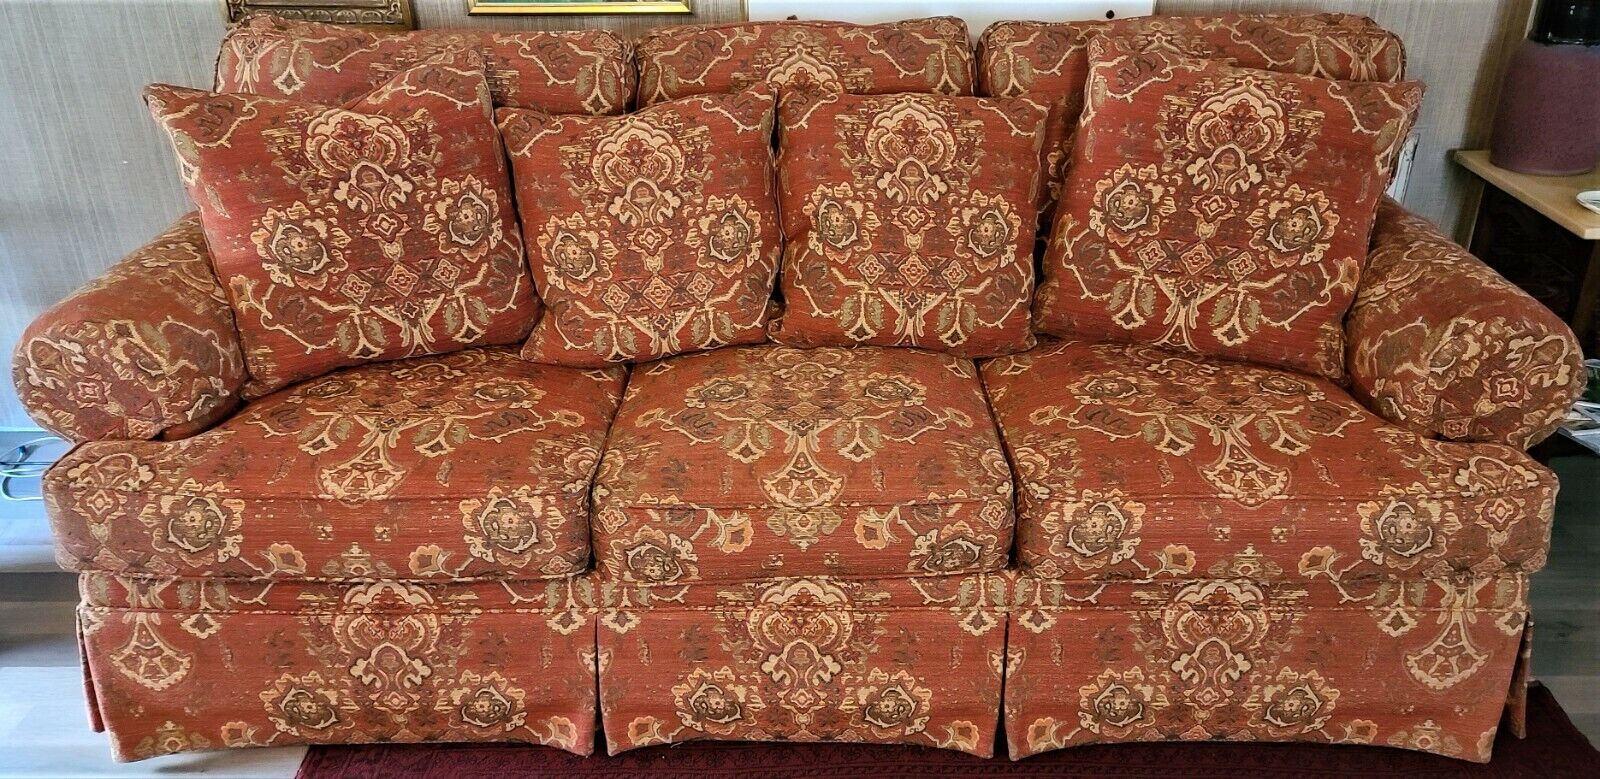 HENREDON Sofa Upholstery Collection English Style with 4 Pillows 